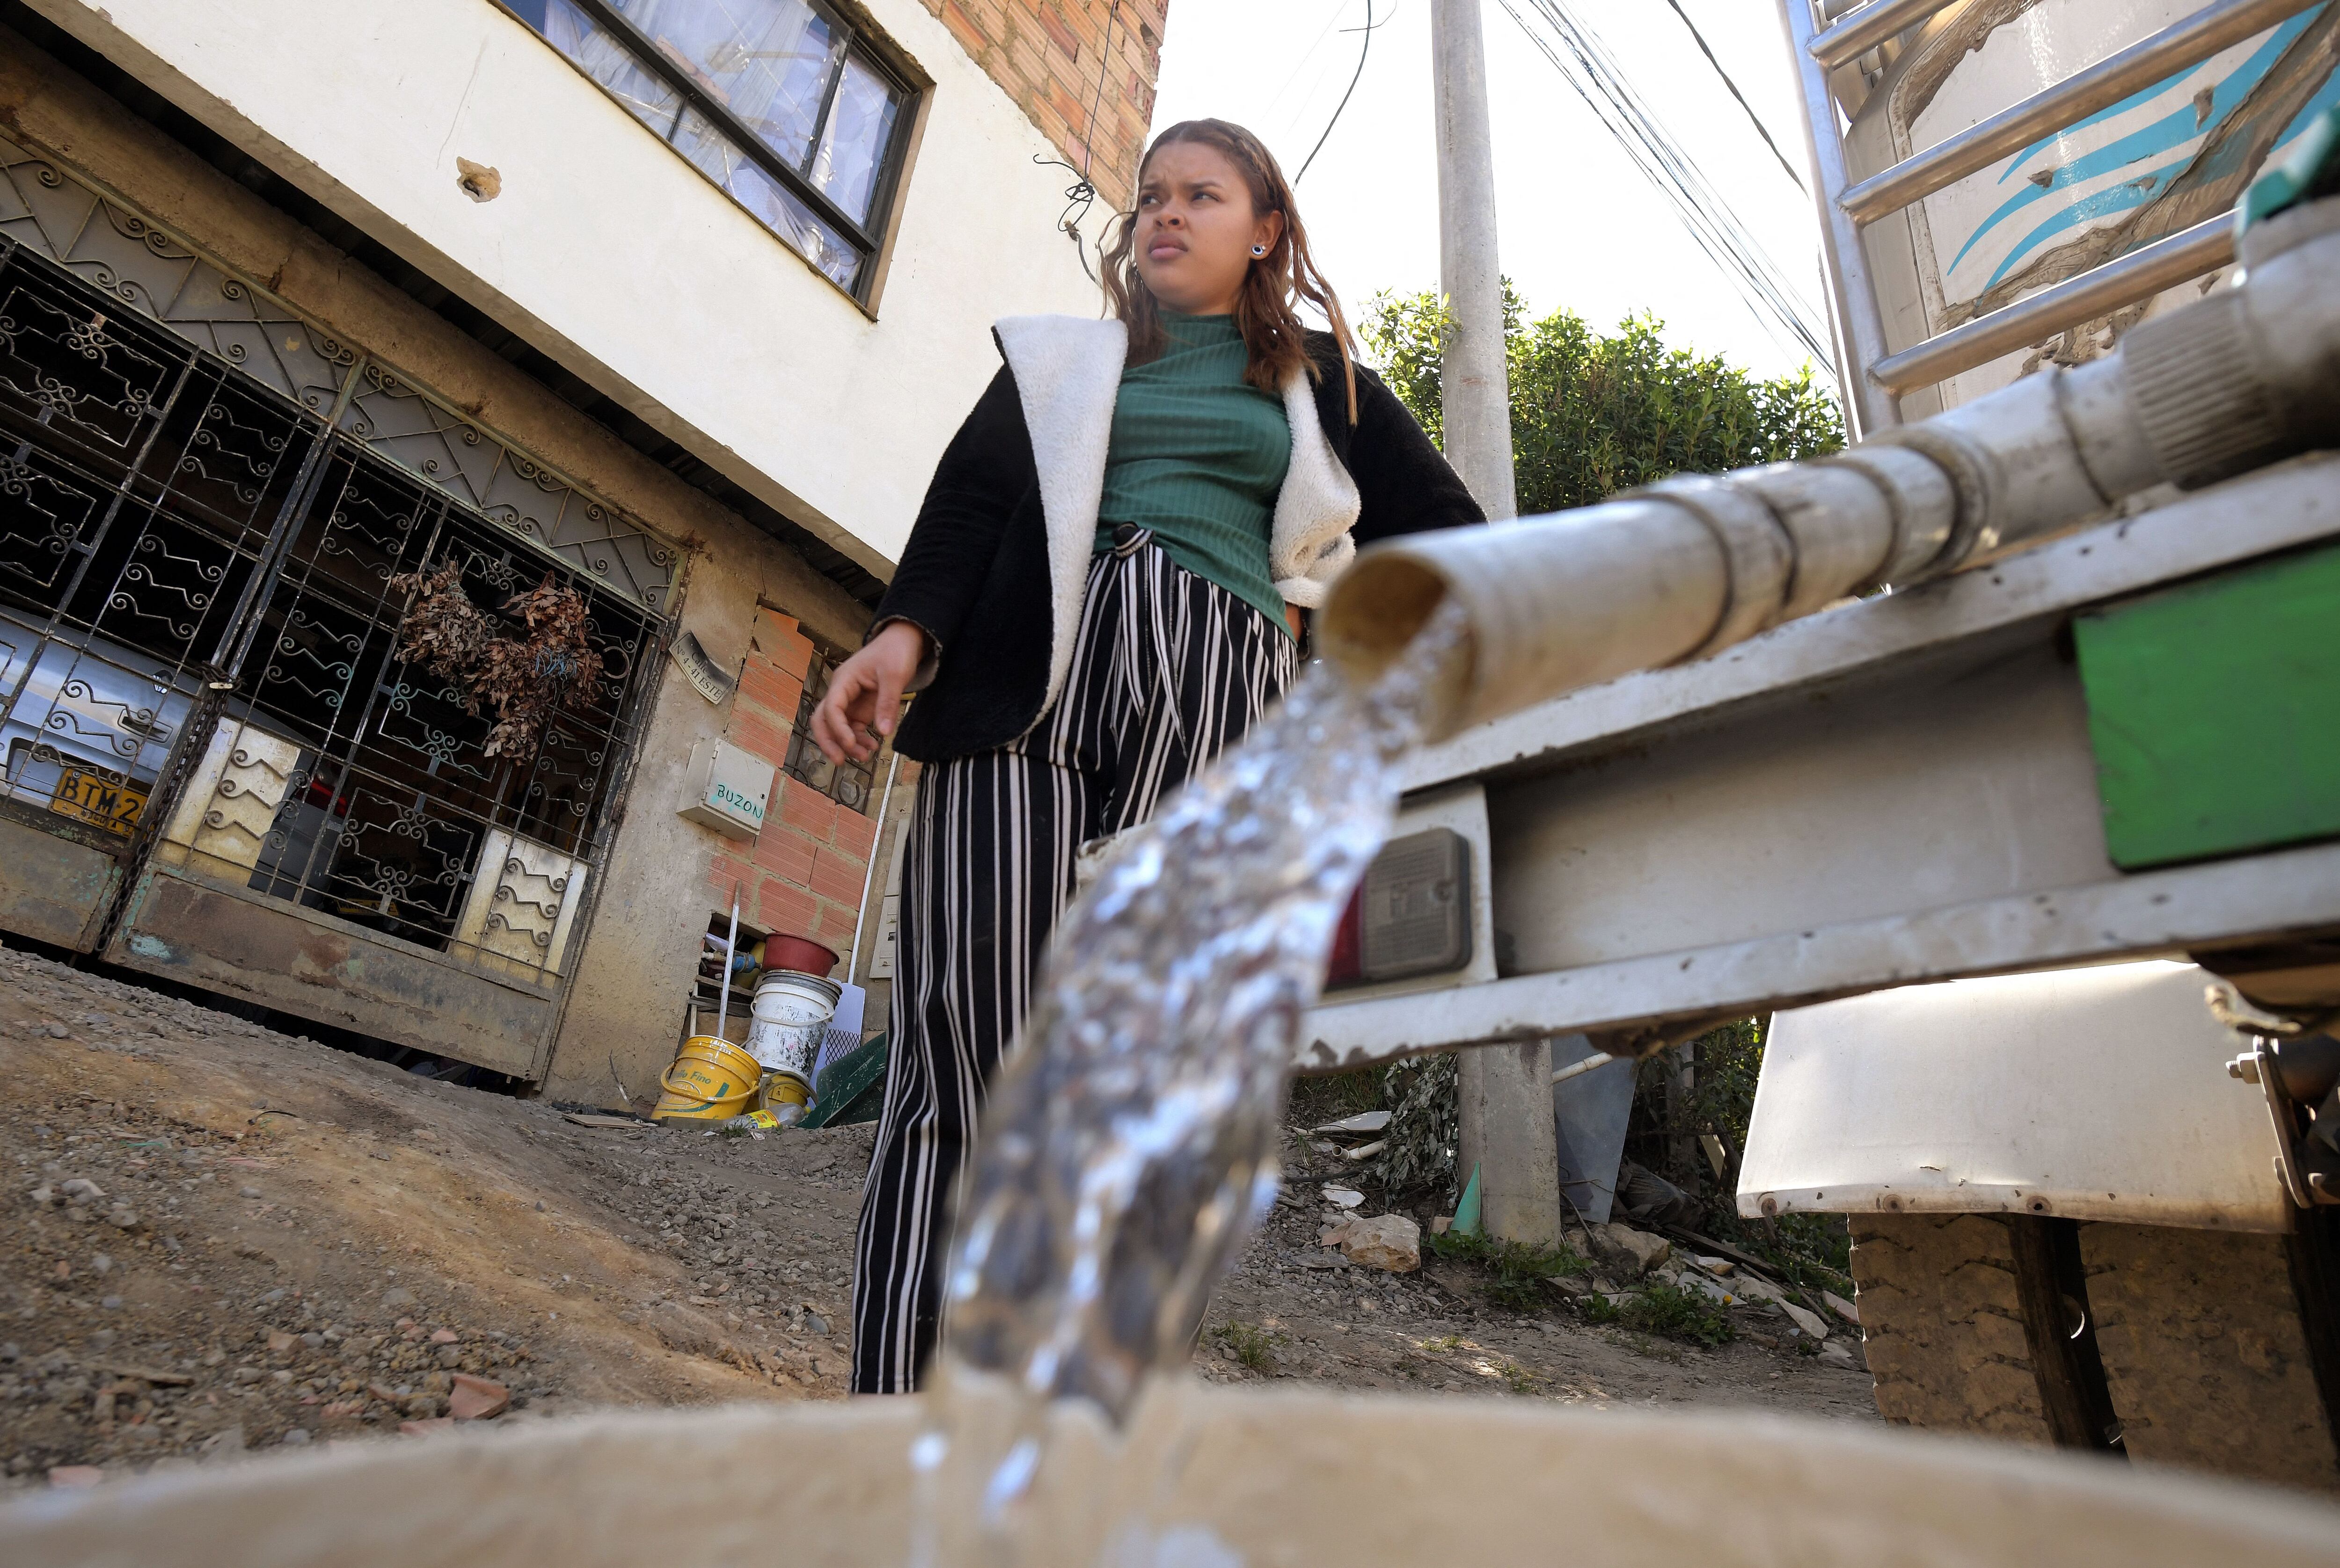 A woman collects drinking water from a water truck in La Calera, near Bogota, April 10, 2024. A tanker truck delivers water on the steep streets of La Calera, a neighbour of the Colombian capital. For weeks now, this region considered rich in water resources has been experiencing unprecedented shortages due to the El Ni�o phenomenon and climate change. (Photo by Daniel MU�OZ / AFP)